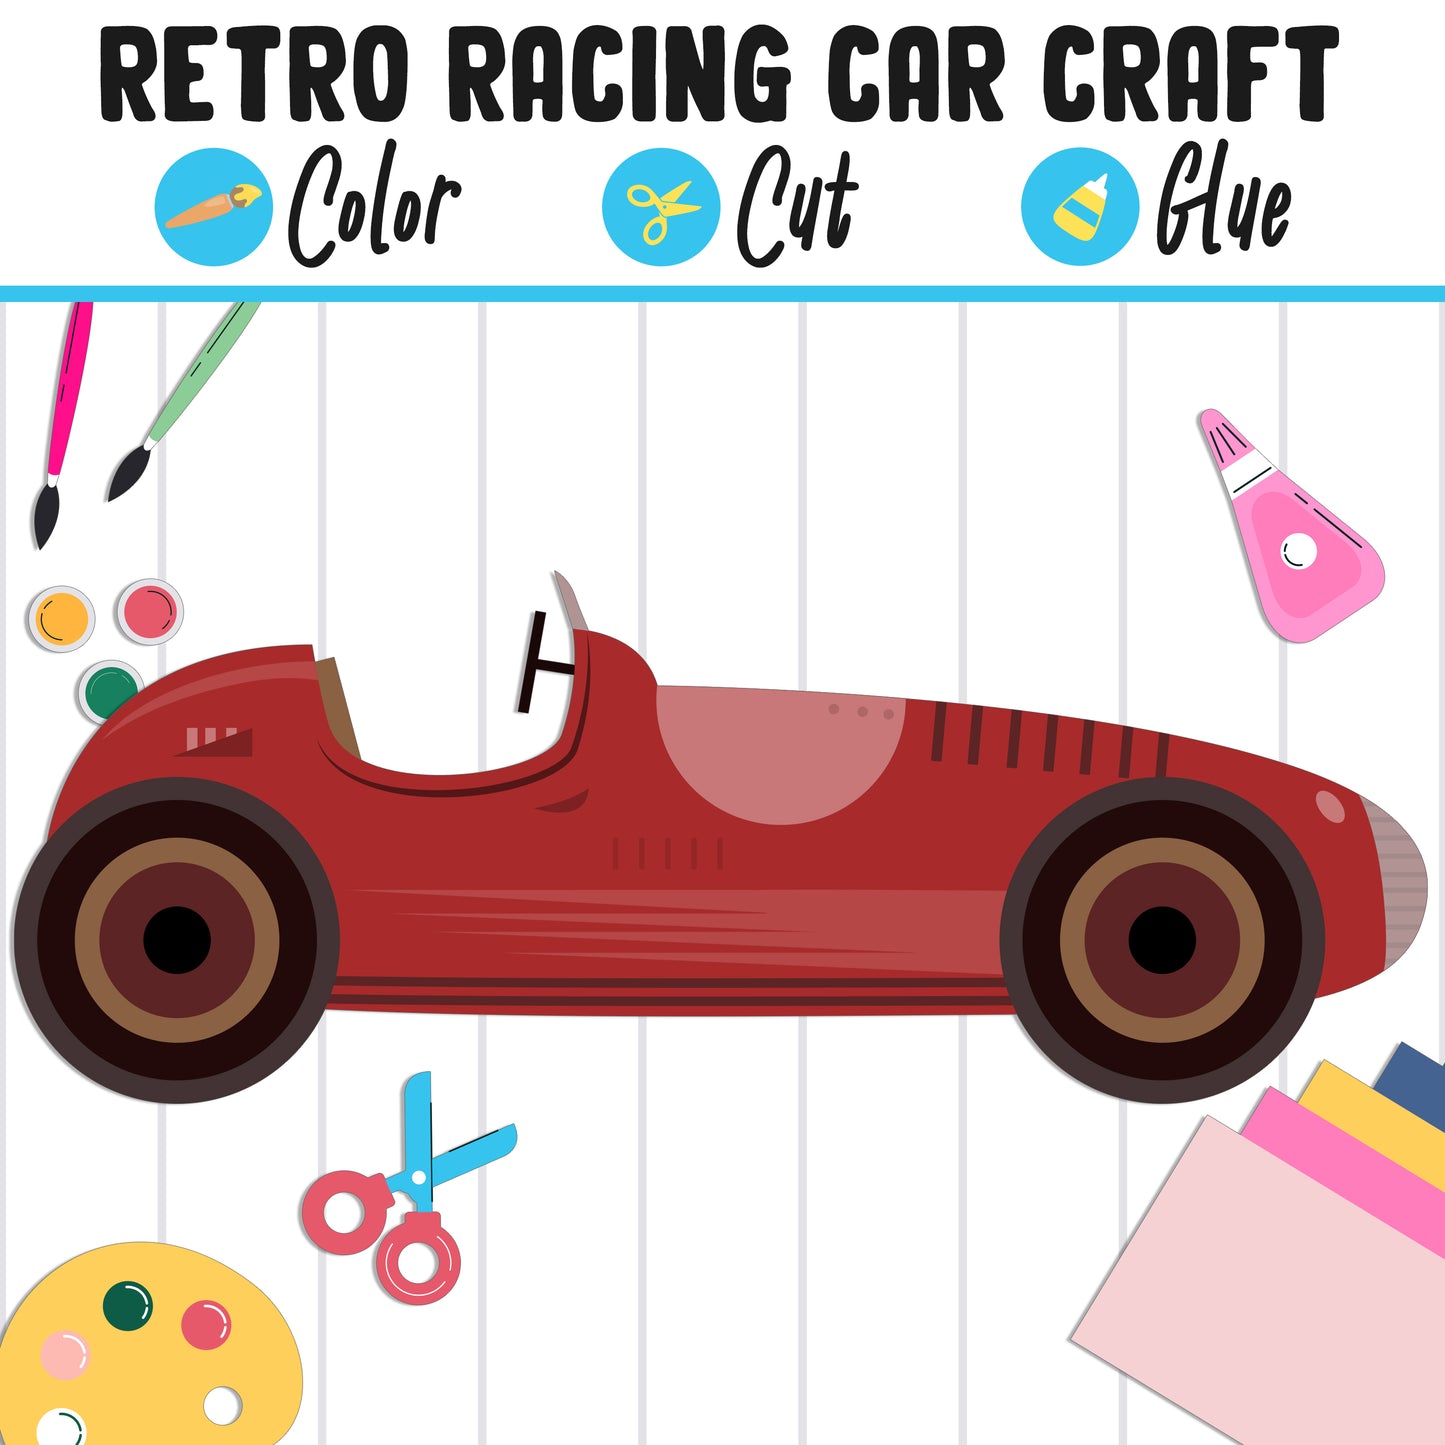 Retro Racing Car Craft Activity - Color, Cut, and Glue for PreK to 2nd Grade, PDF File, Instant Download